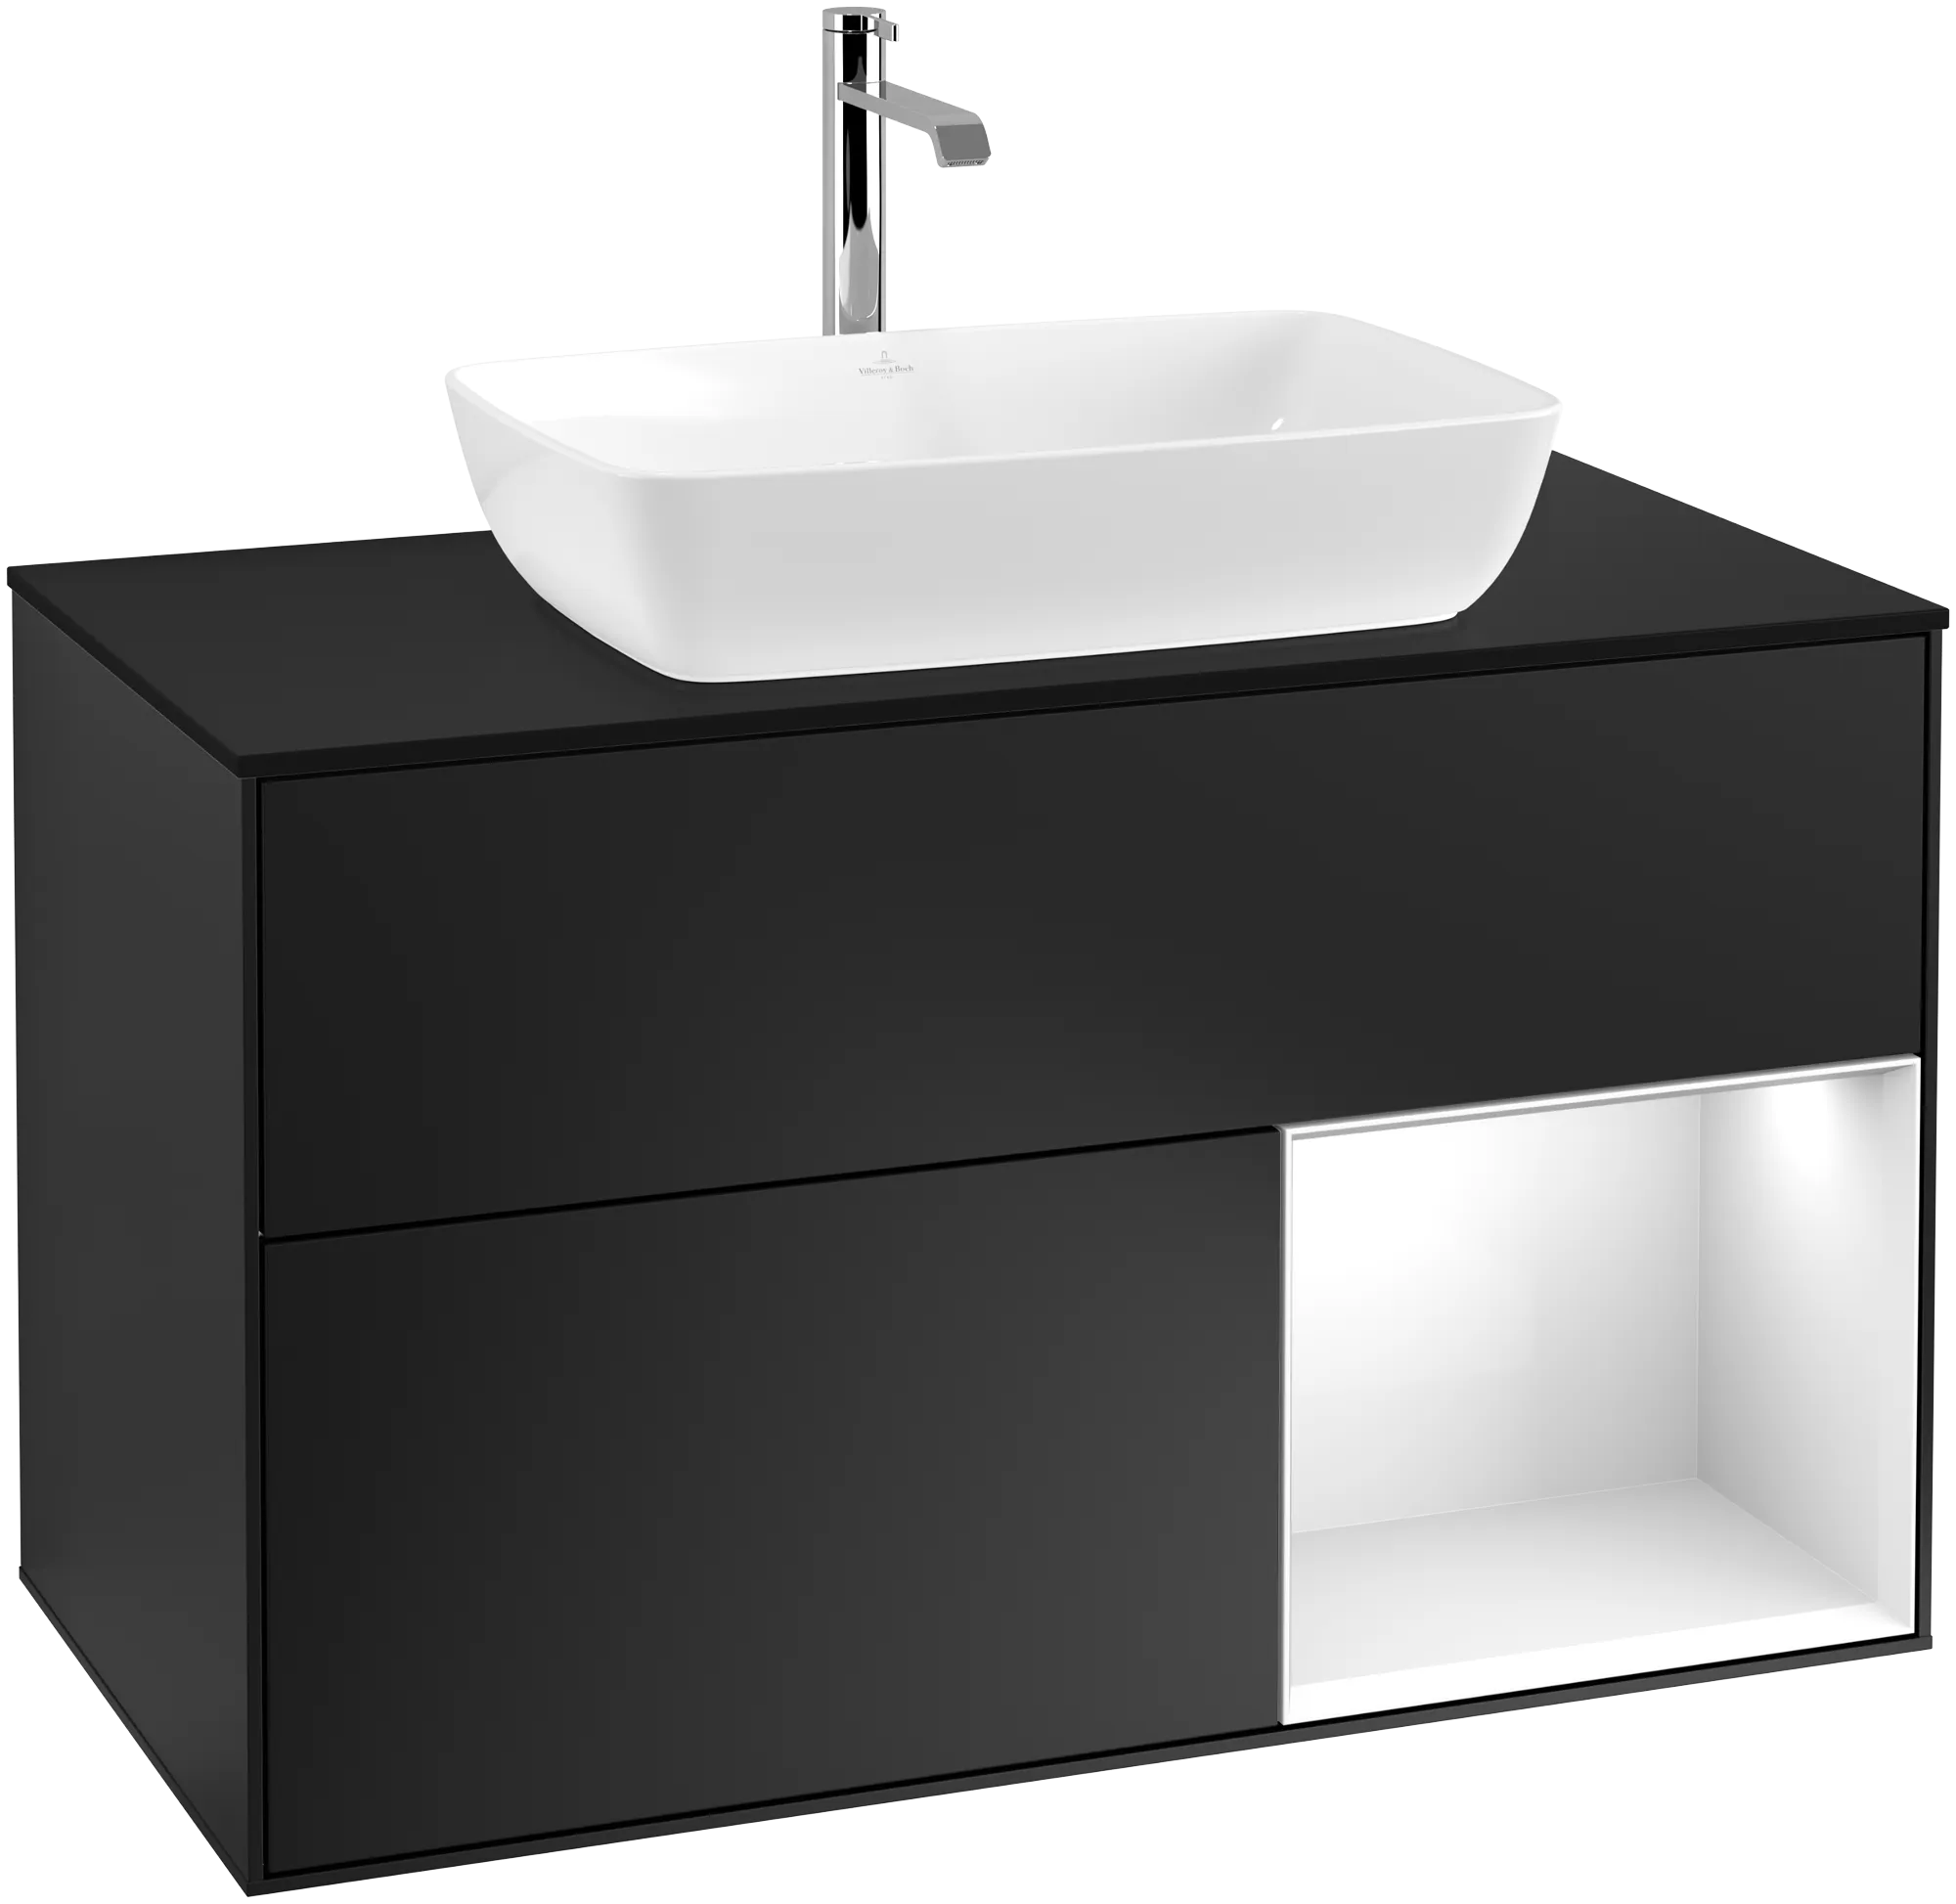 Зображення з  VILLEROY BOCH Finion Vanity unit, with lighting, 2 pull-out compartments, 1000 x 603 x 501 mm, Black Matt Lacquer / Glossy White Lacquer / Glass Black Matt #G782GFPD